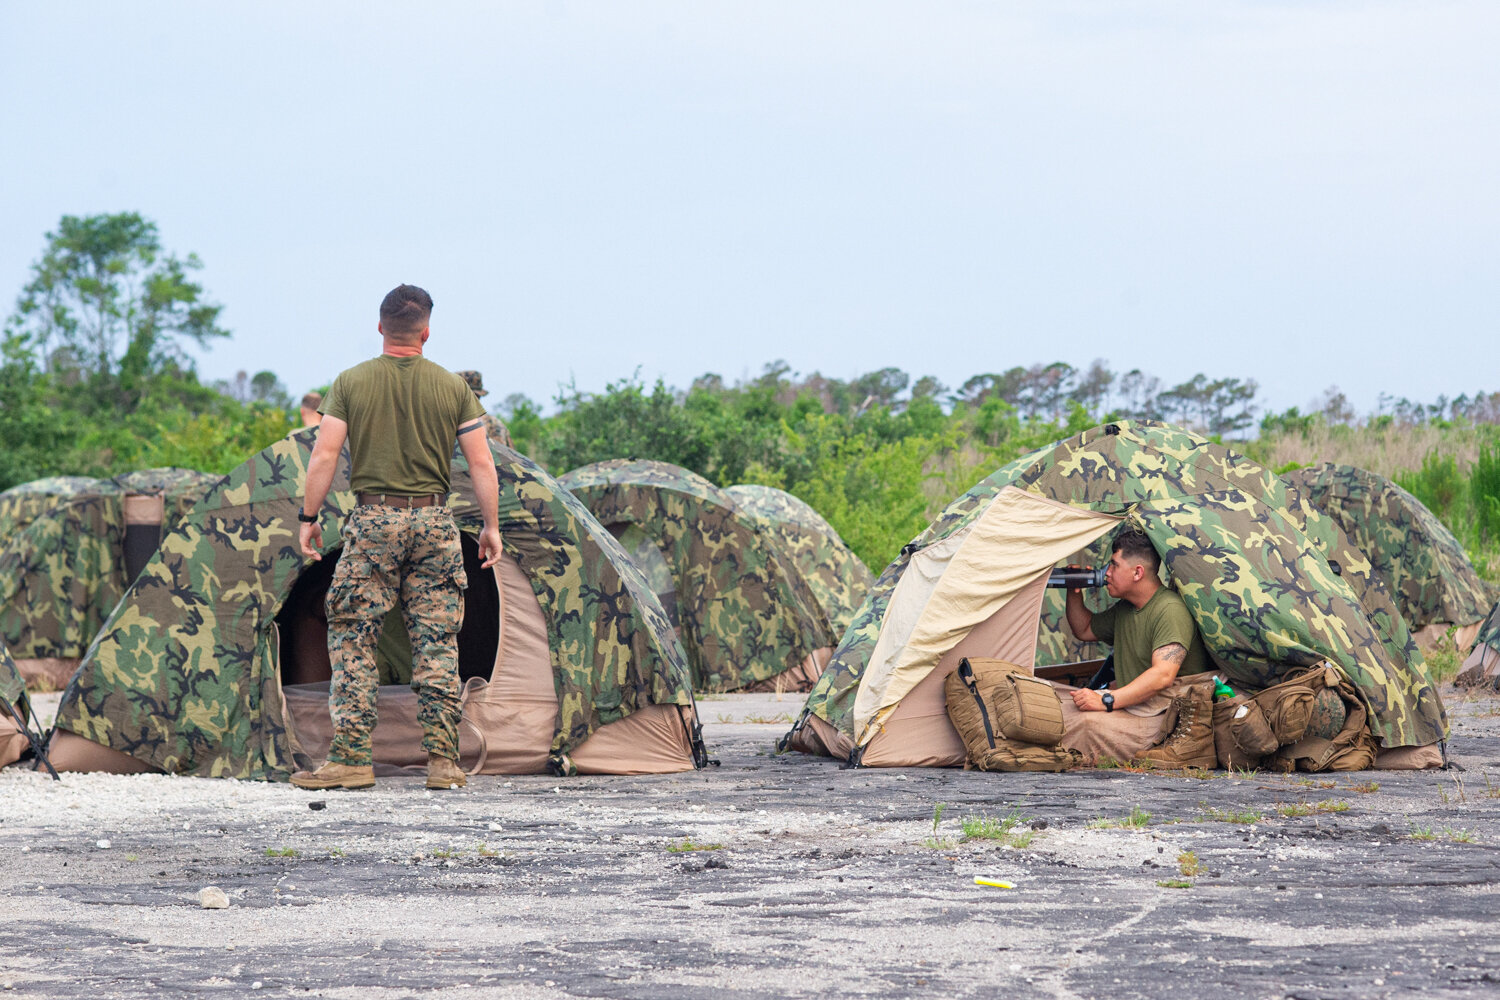  Marines from the 3rd Battalion, 2nd Marines infantry battalion camped out at Bogue Airfield, just east of Swansboro. Nearly 500 Marines took part in what Lieutenant Colonel Darrel Ayers called the largest air assault exercise on the east coast in ap